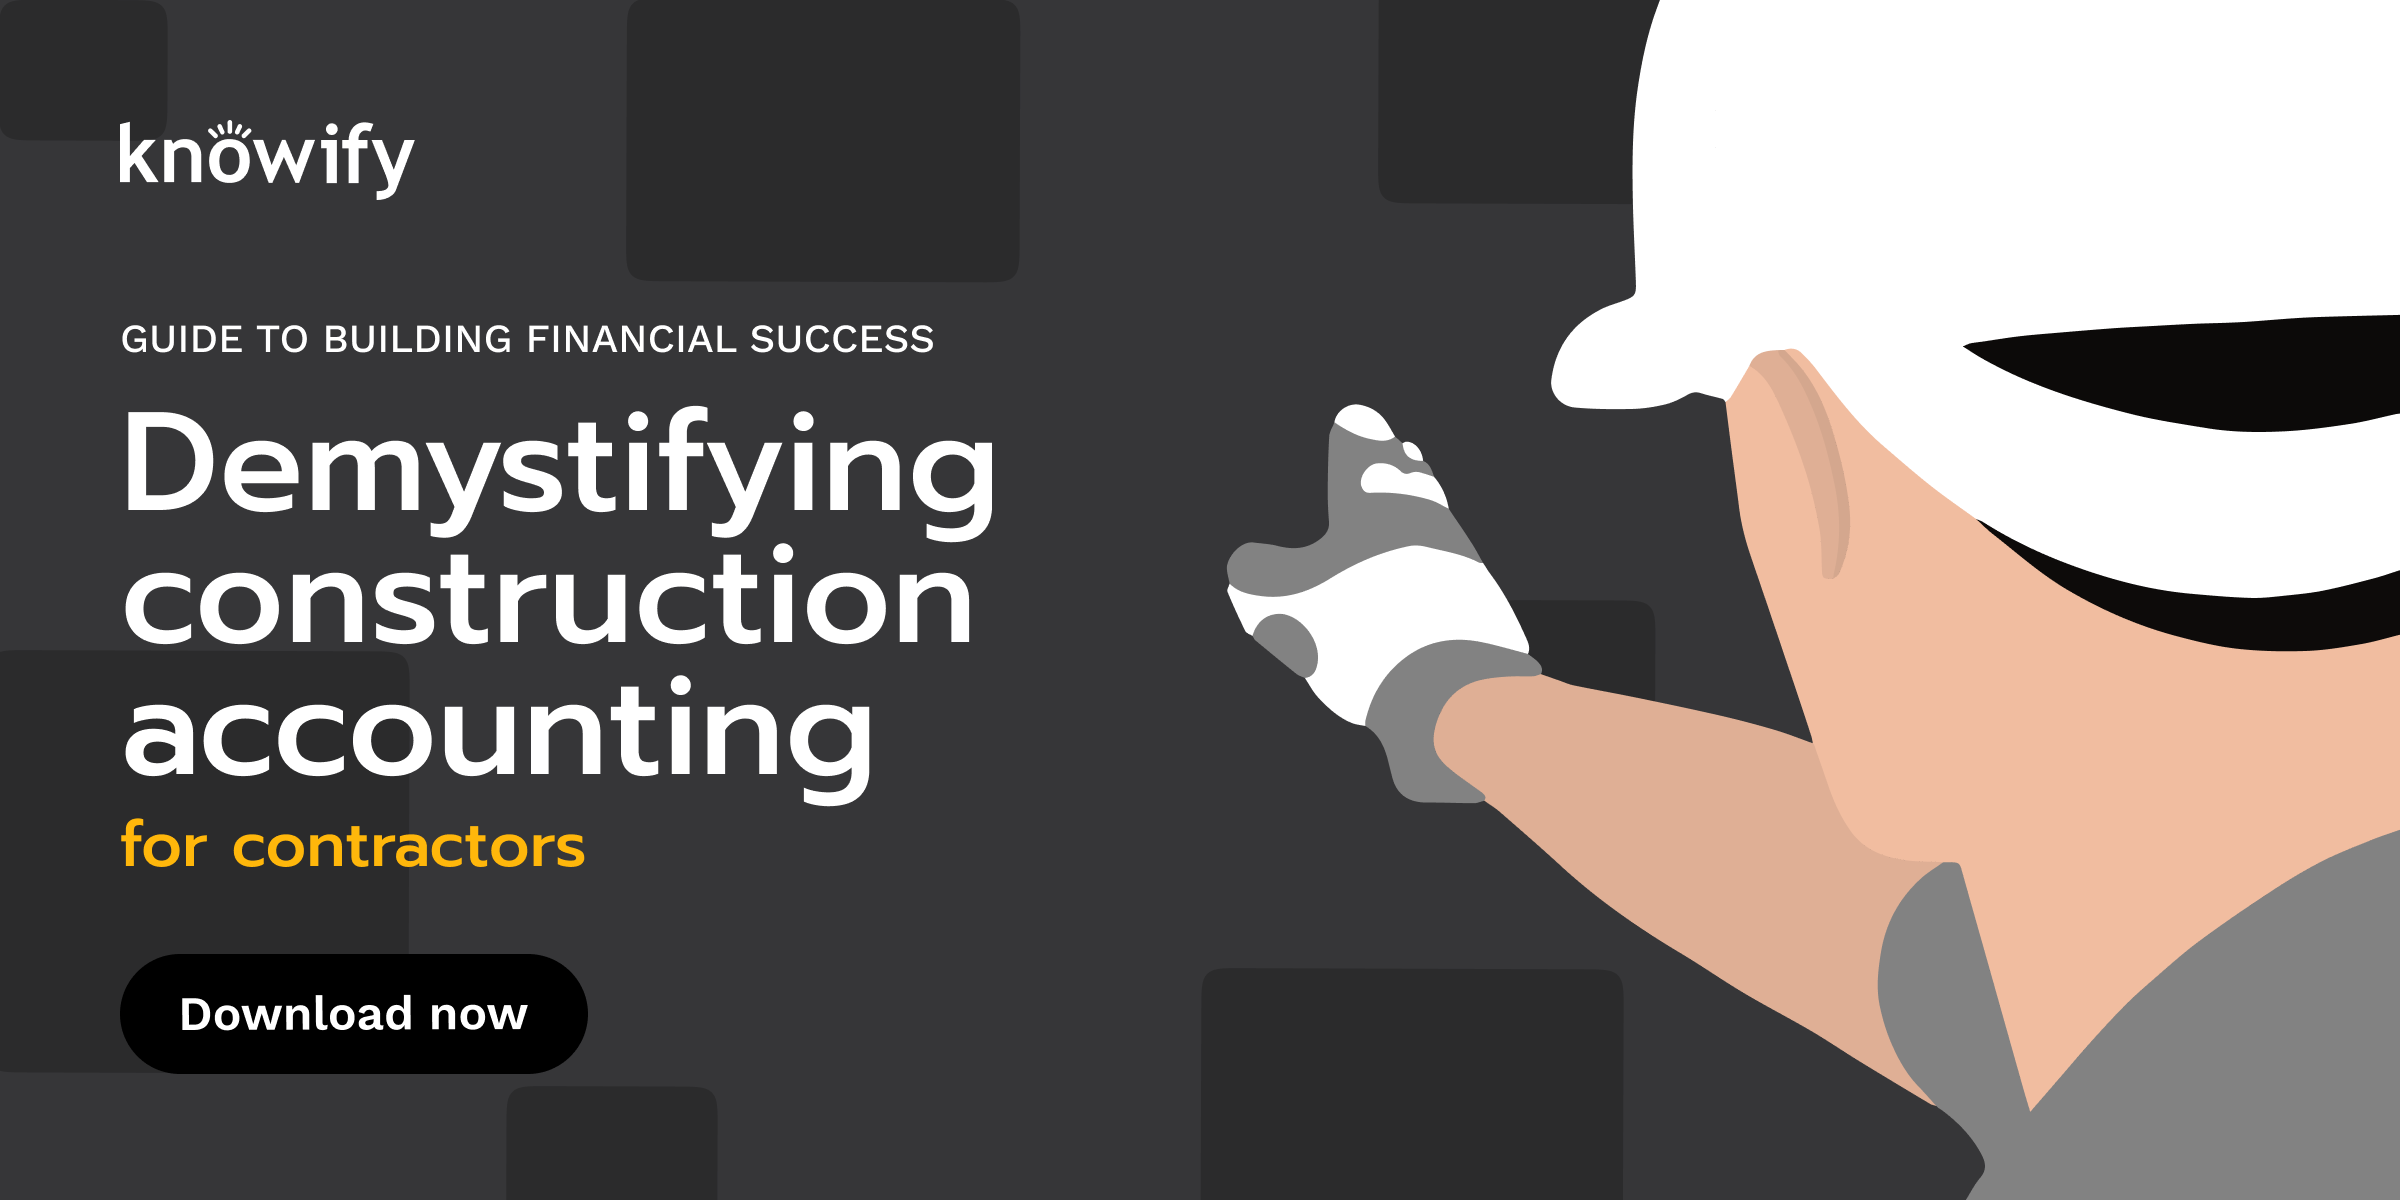 The Contractor's Guide to Building Financial Success